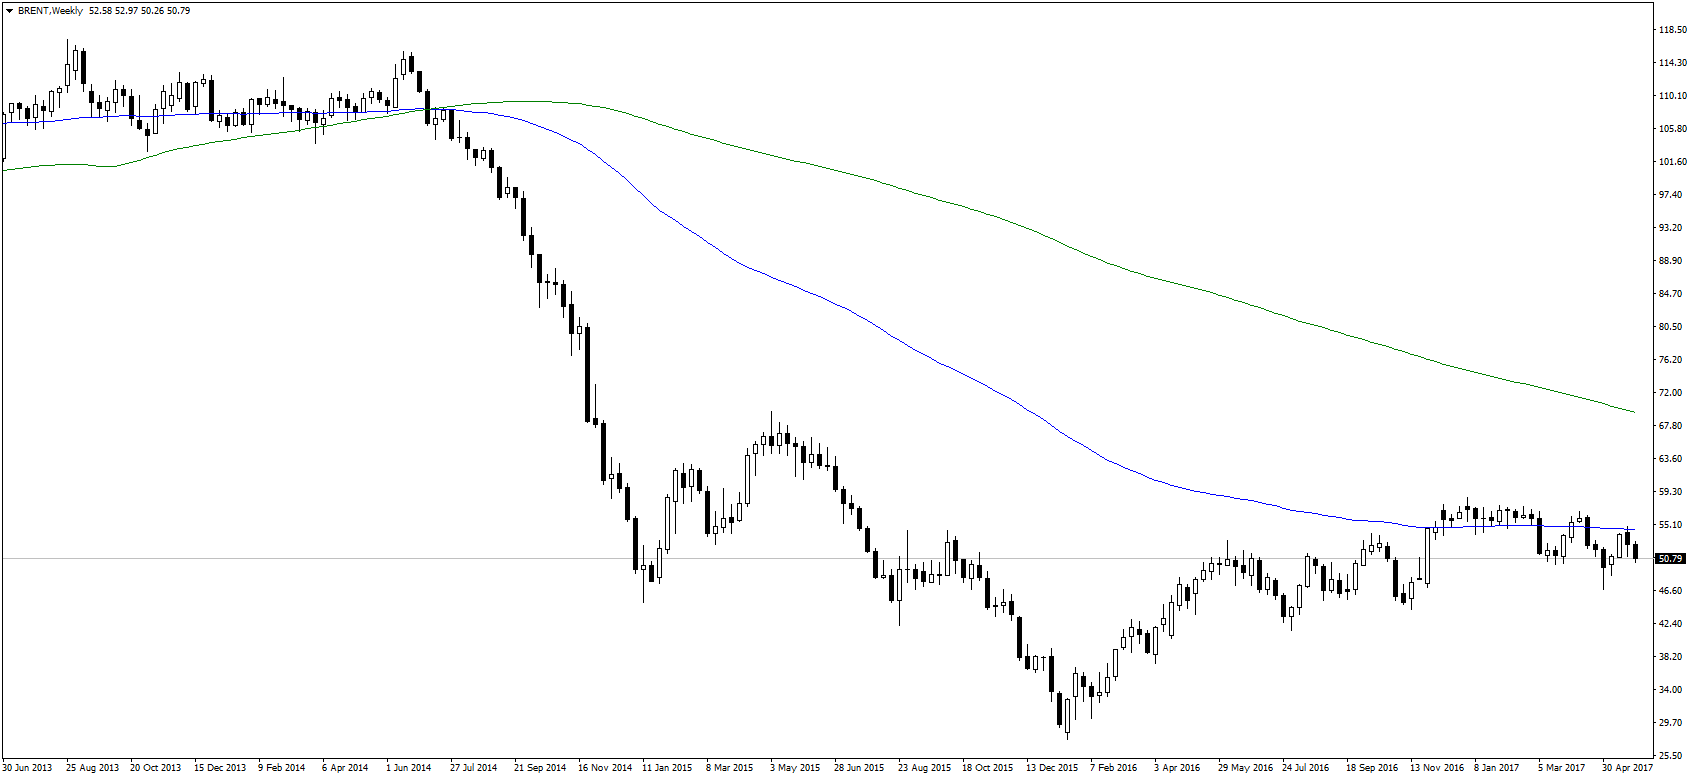 Weekly chart of BRENT crude oil prices